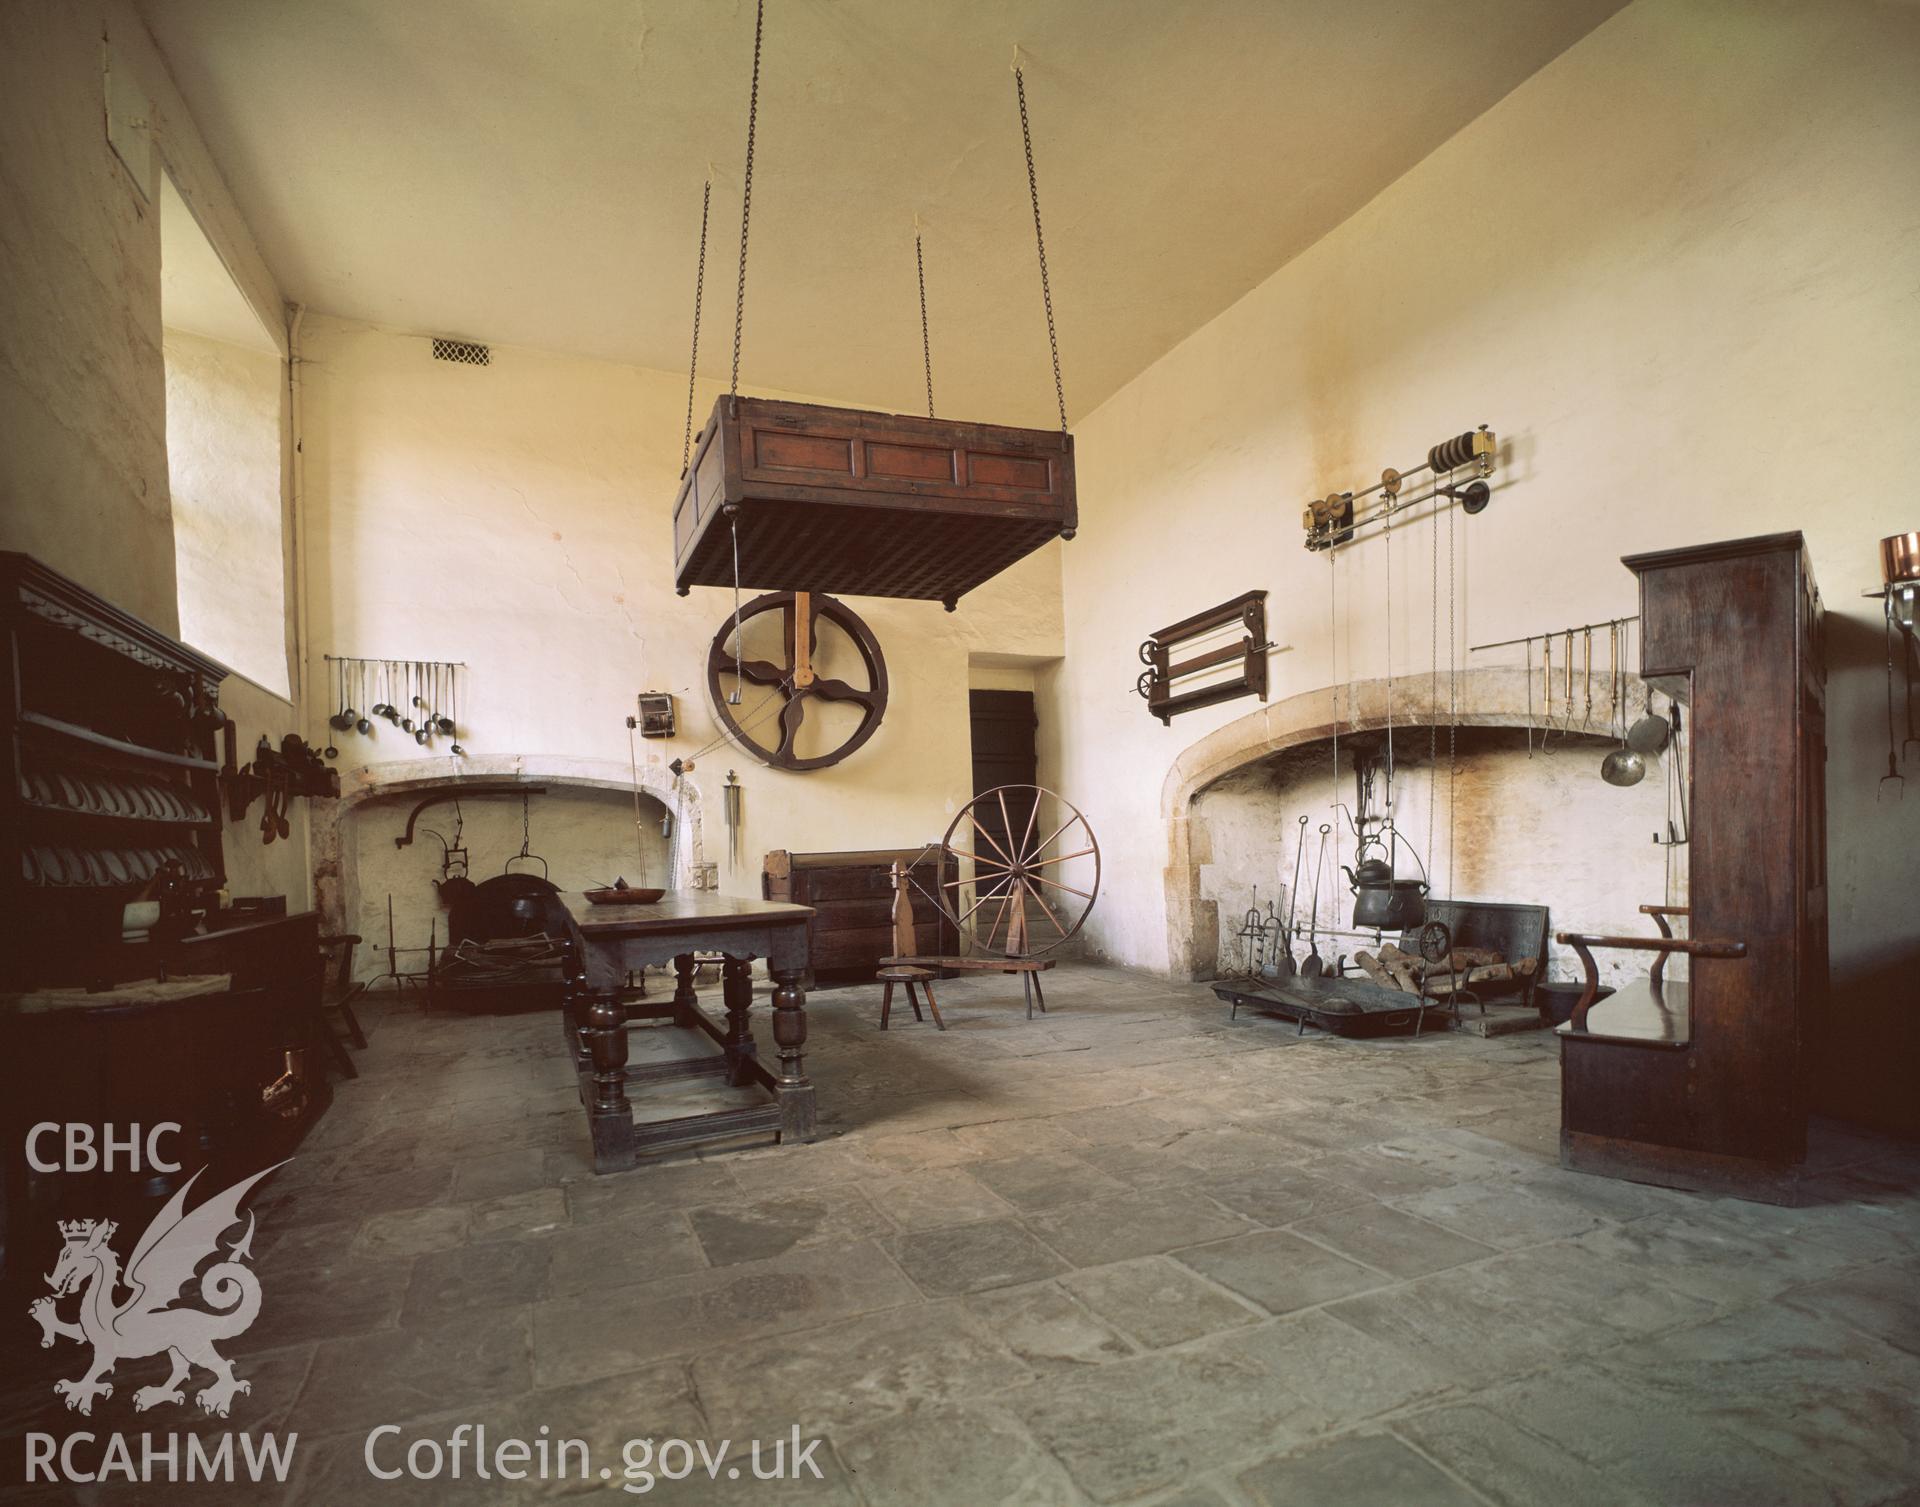 RCAHMW colour transparency of an interior view of the kitchen at St Fagans.